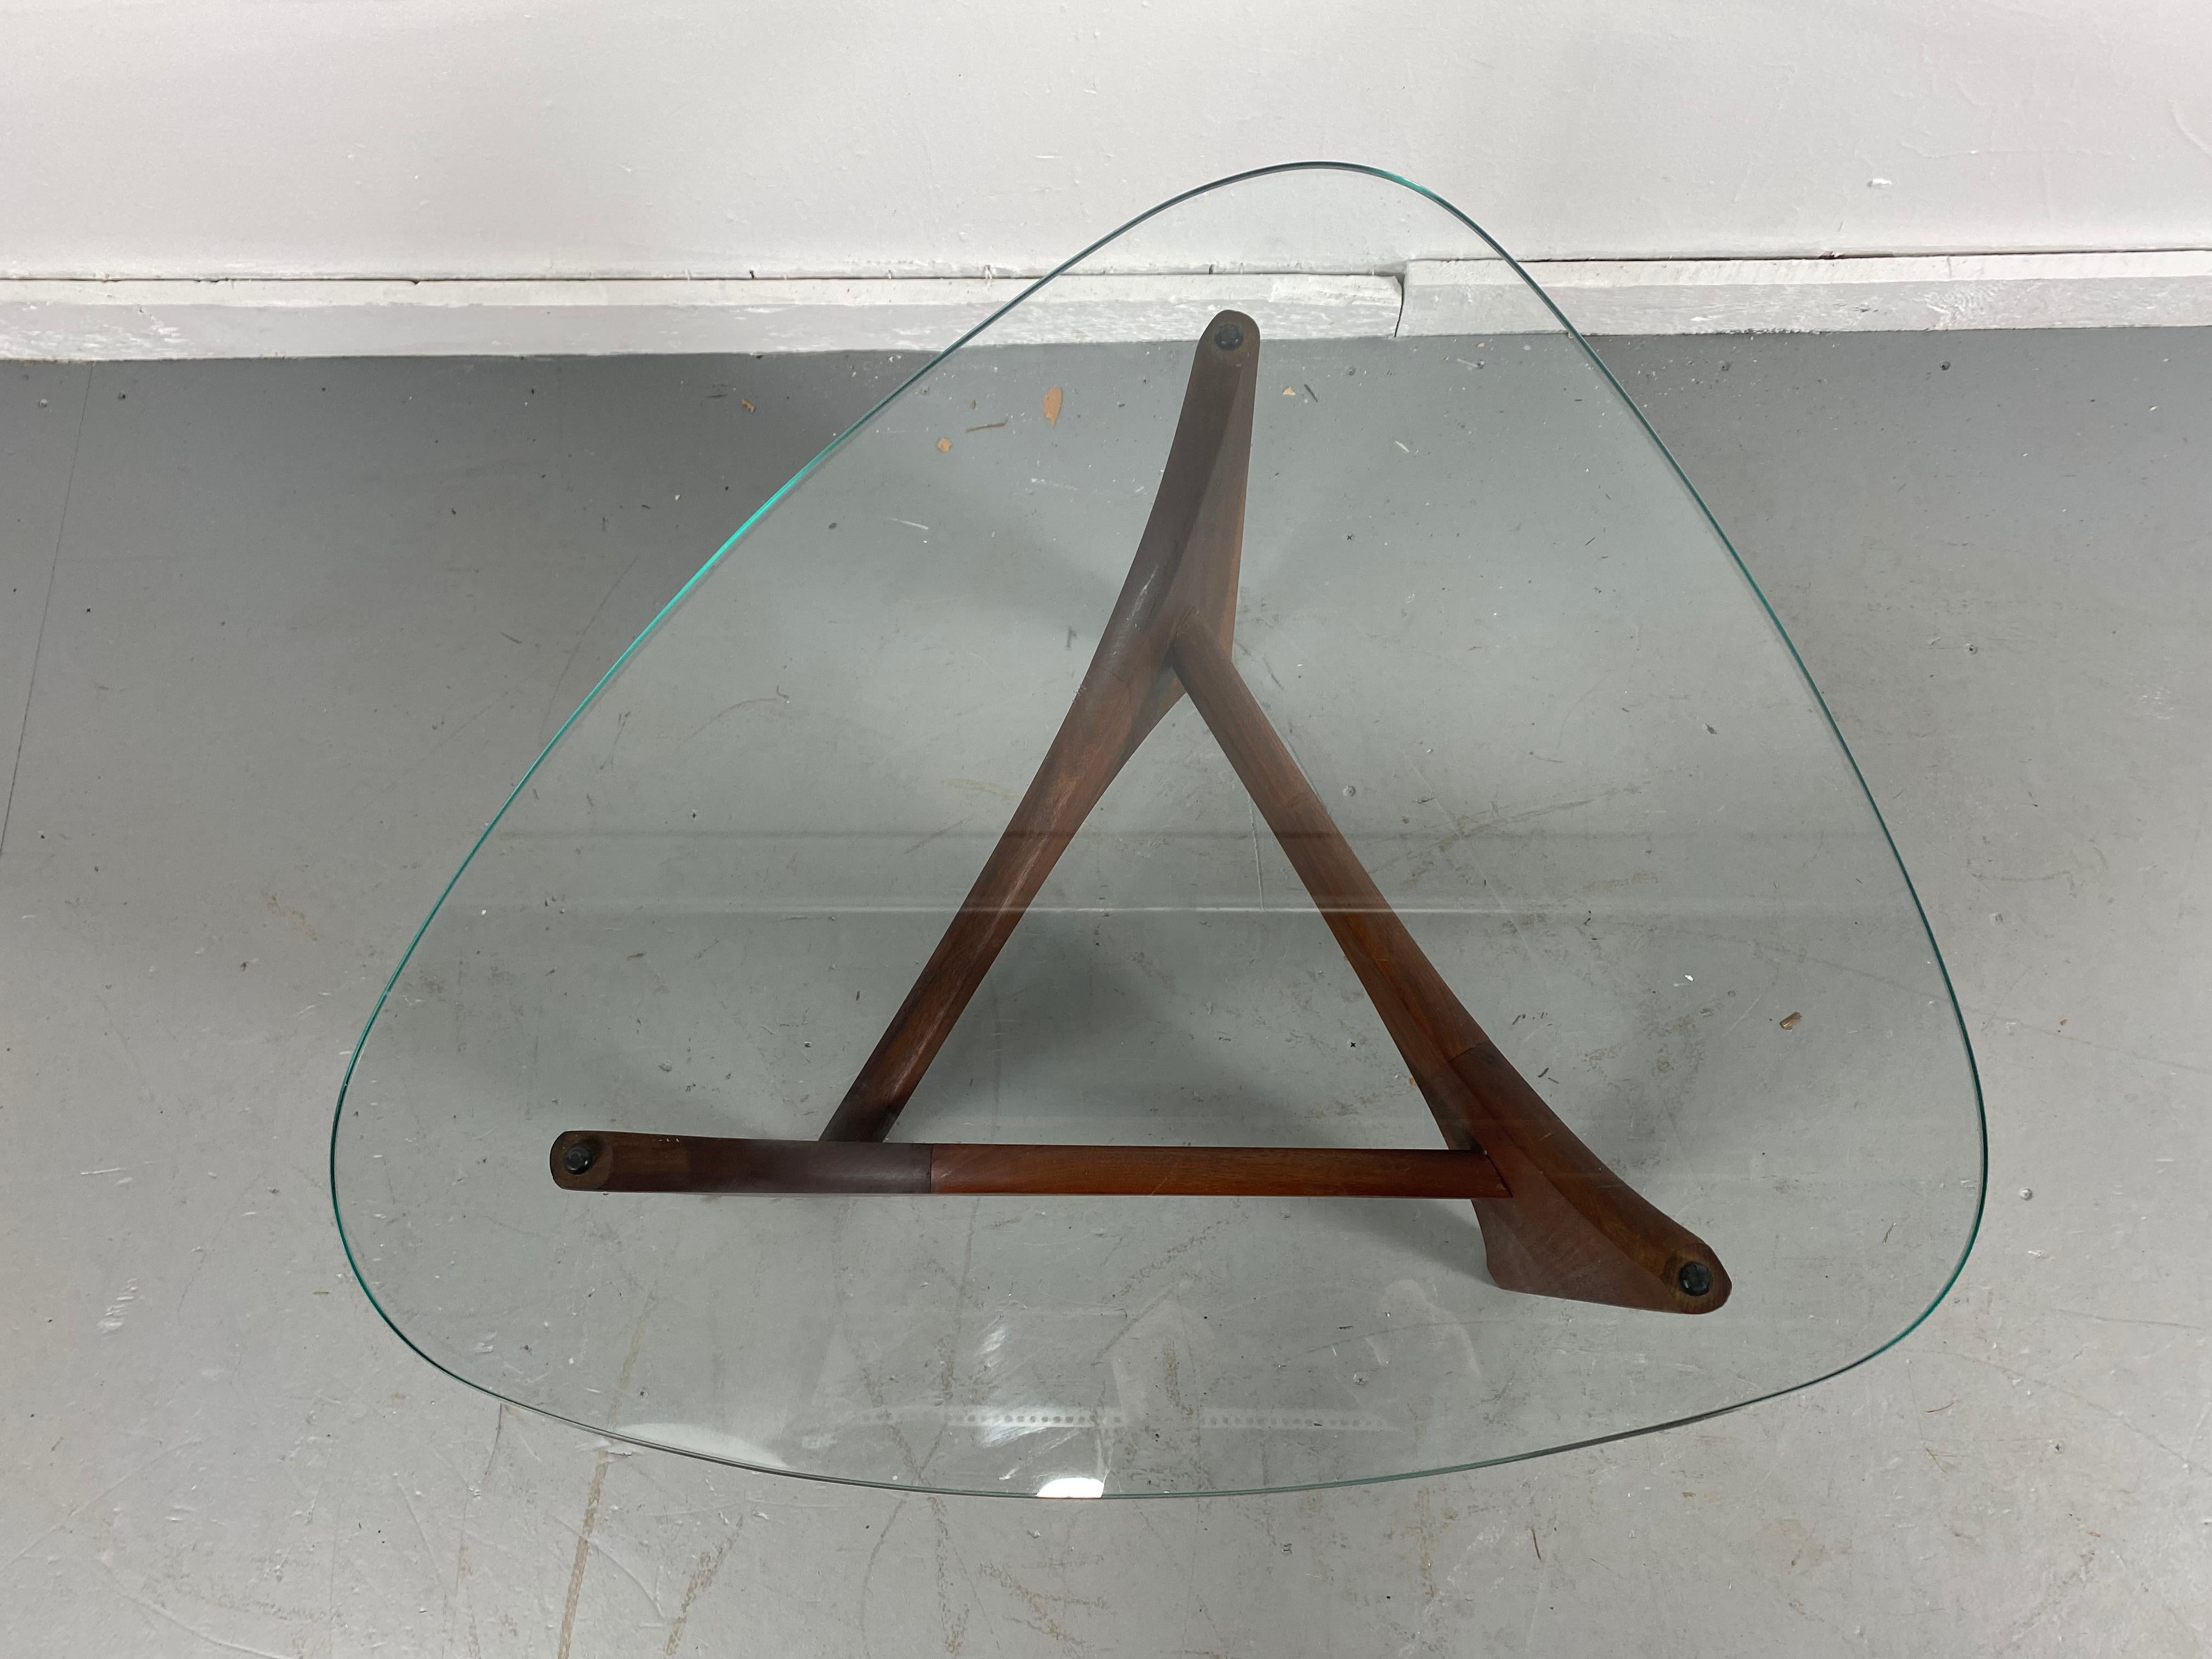 Fabulous Adrian Pearsall end table or cocktail table with a sculptural walnut base and a glass top in the form of a guitar pick. In excellent original condition, very tight and sturdy. Glass is perfect, Classic Modernist design.